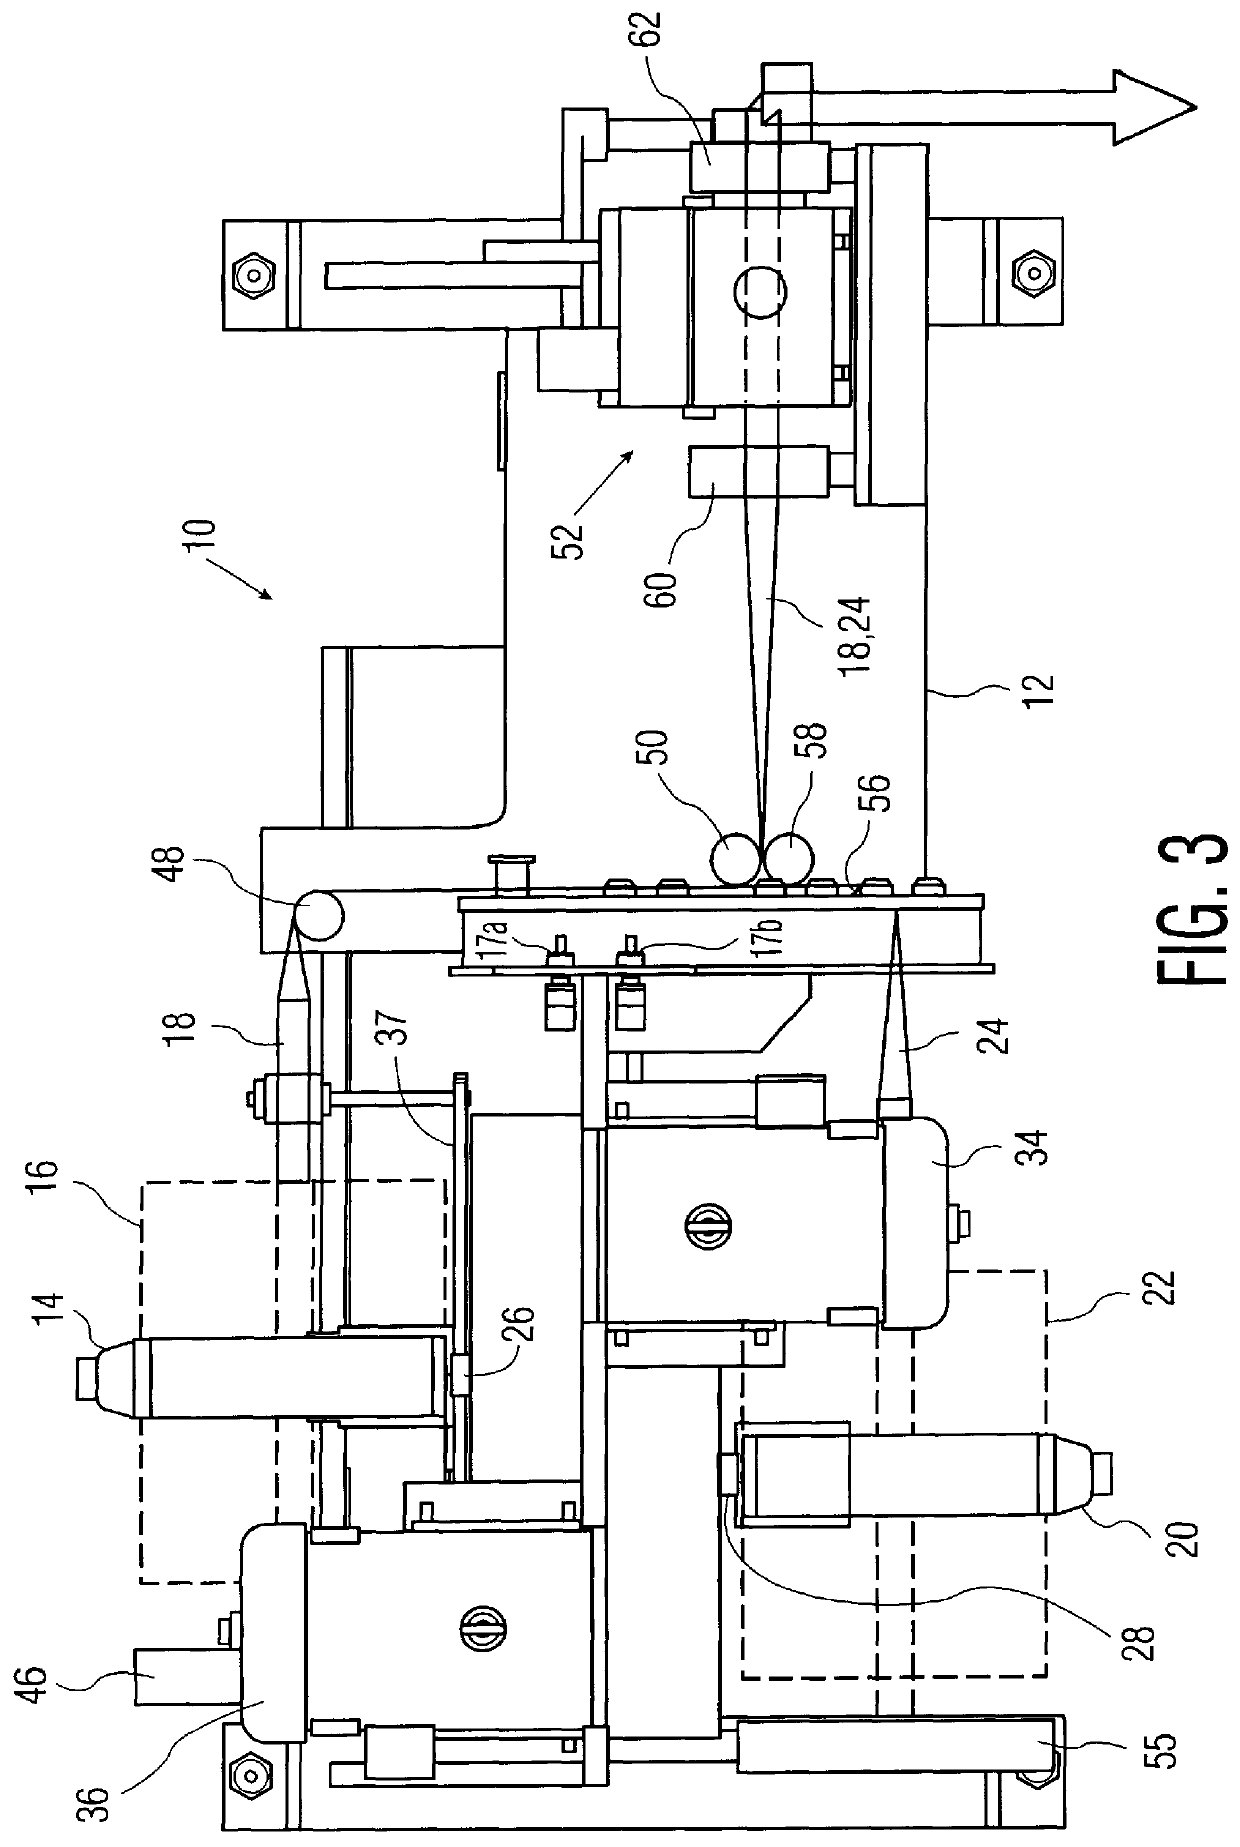 Lap splicing apparatus with the trailing tail end of the splice always on the same side